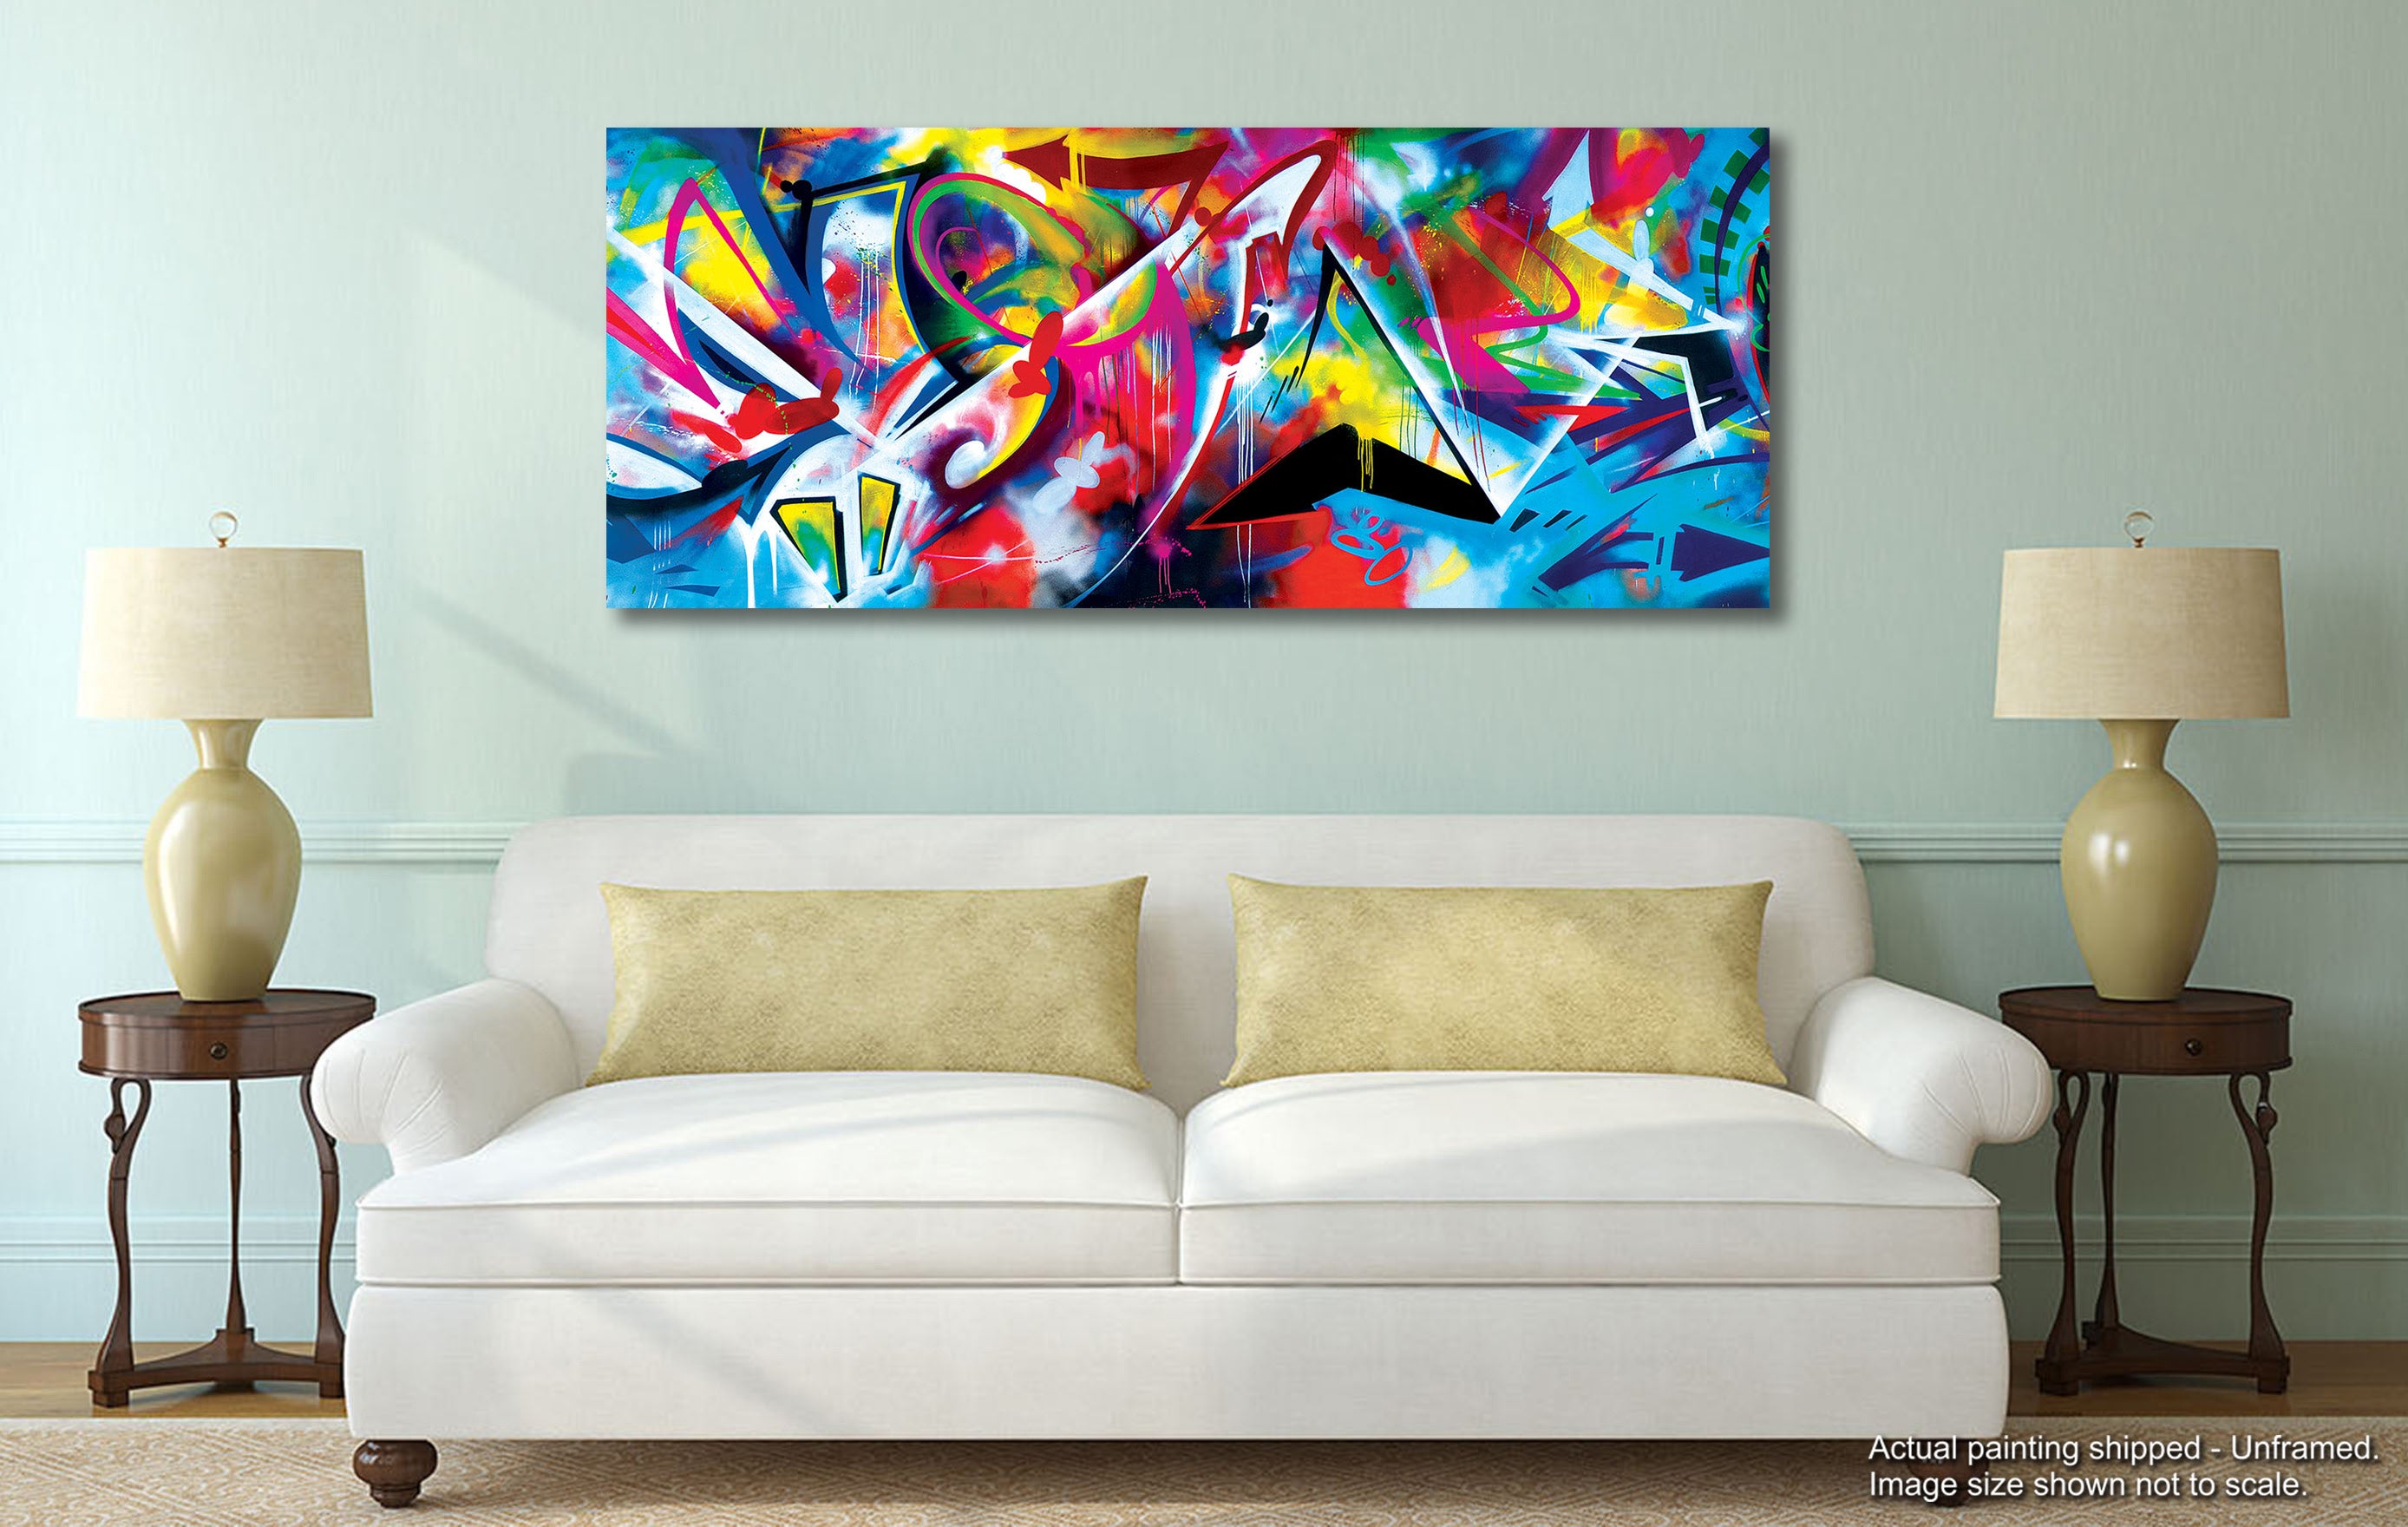 Colors of World - Unframed Canvas Painting